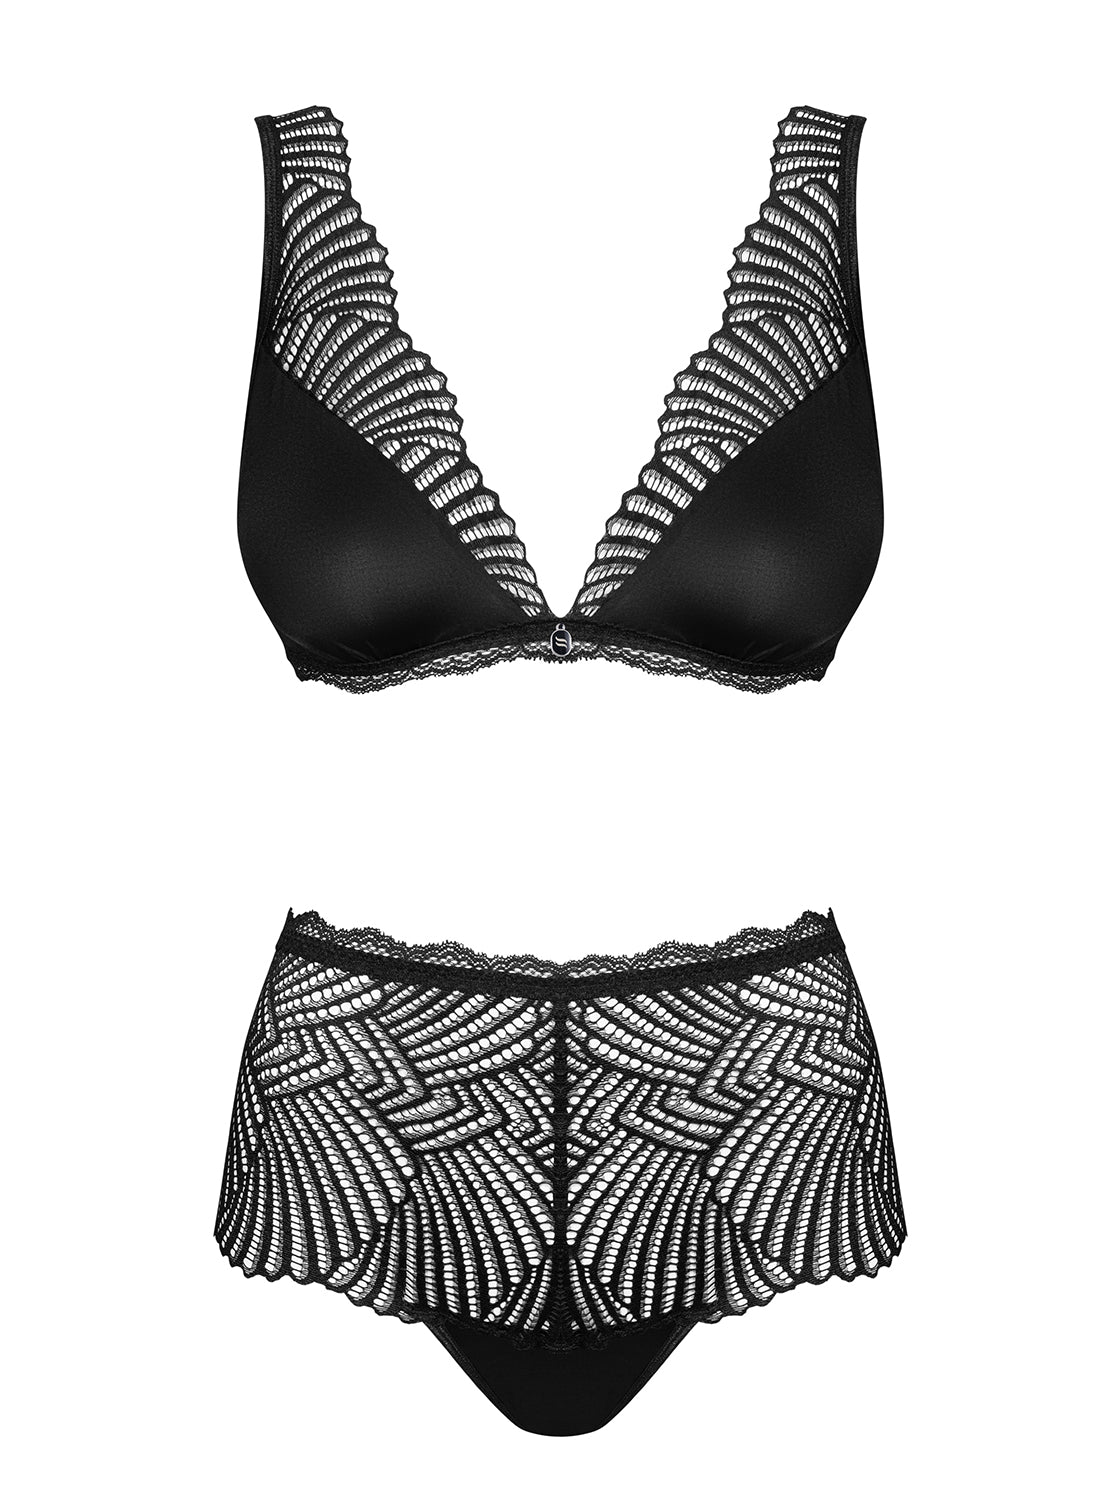 Klarita a seductive set made of soft material in black with transparent and elegantly patterned lace